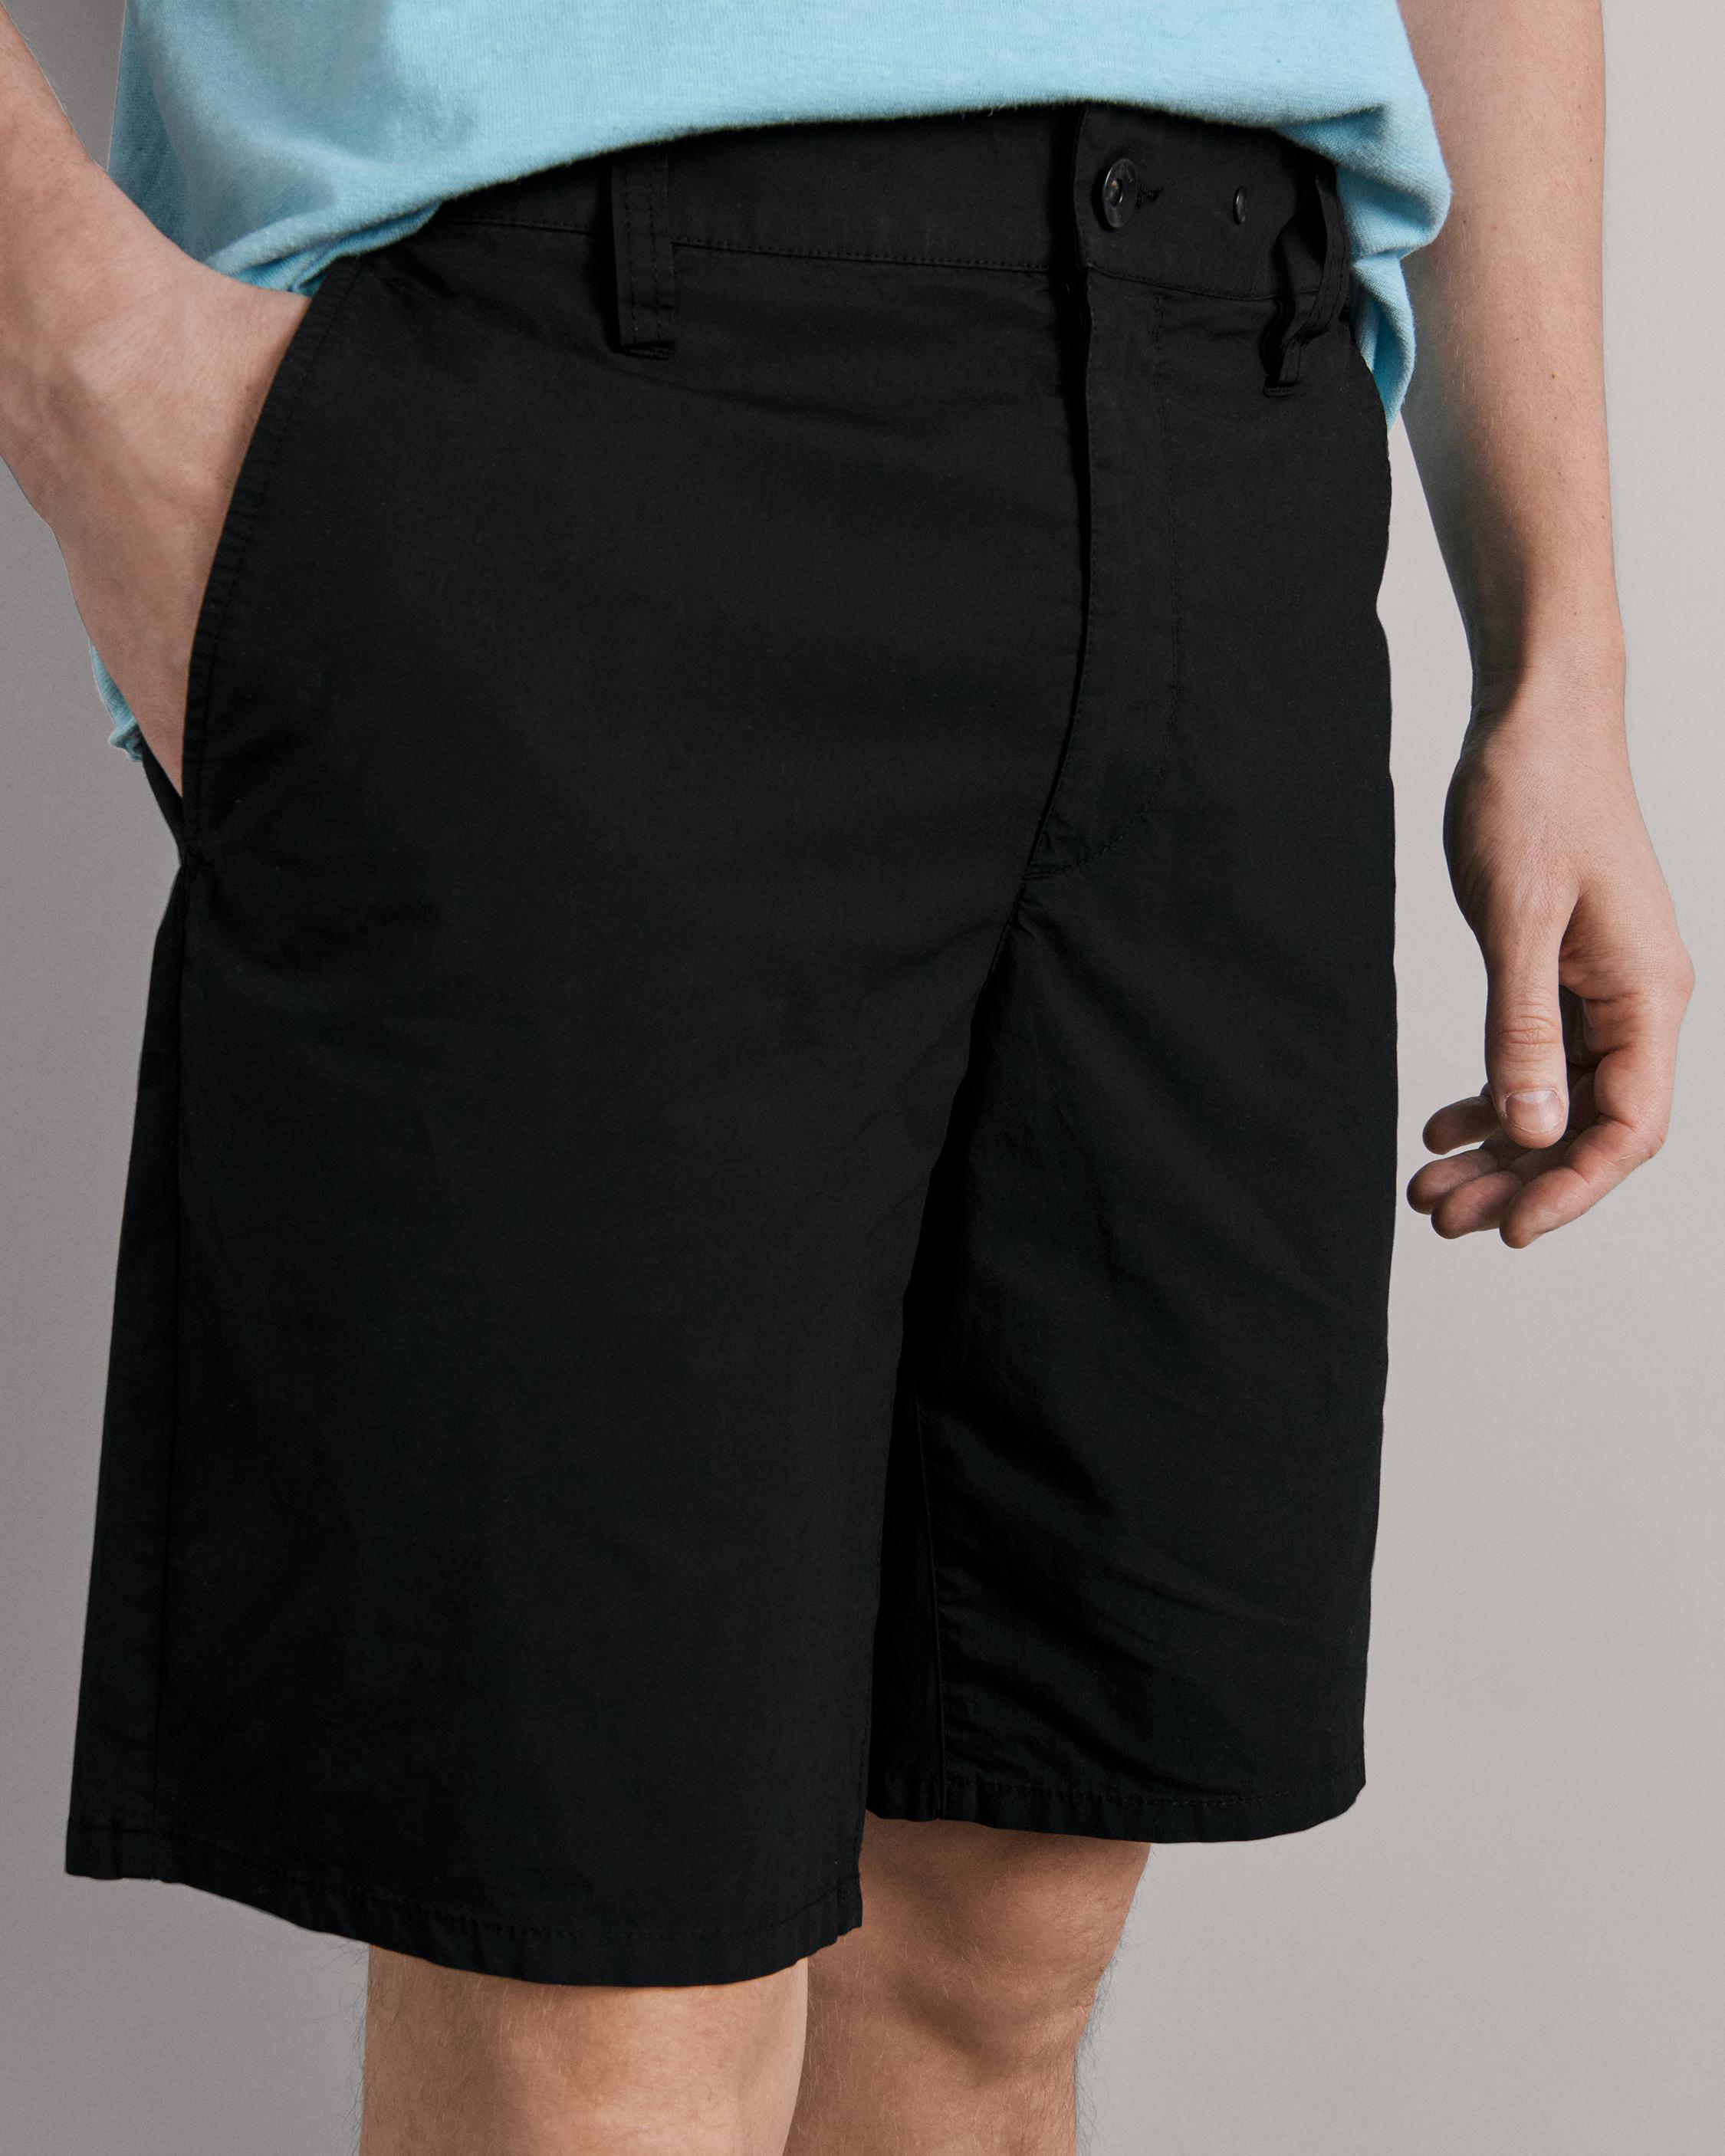 https://cdn.media.amplience.net/i/rb/MBW23S9286W3ML-001-G/Perry-Stretch-Paper-Cotton-Short-001?$large$&fmt=auto